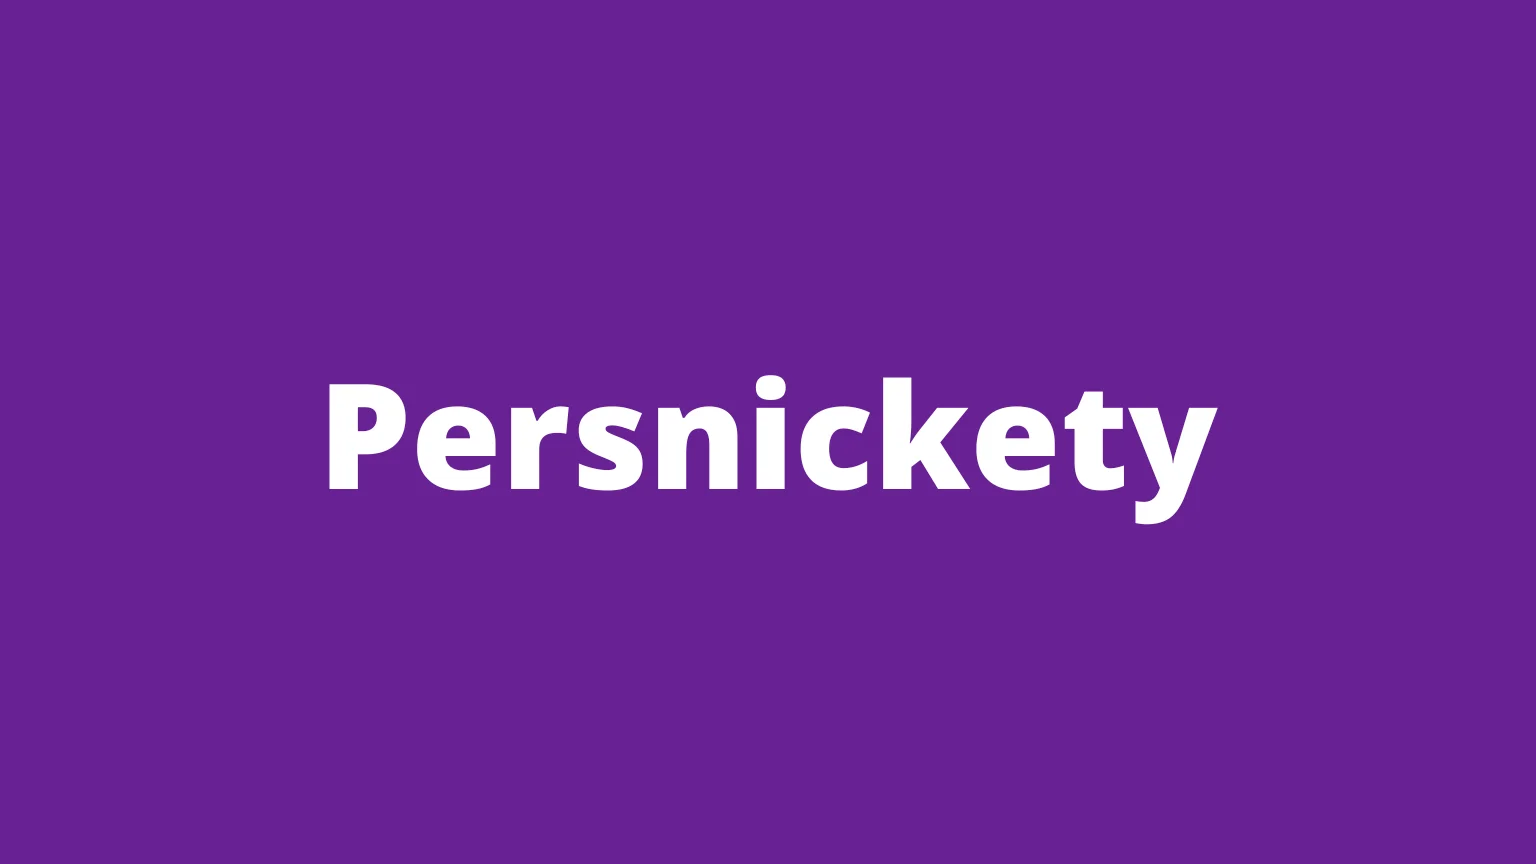 The word persnickety and its meaning